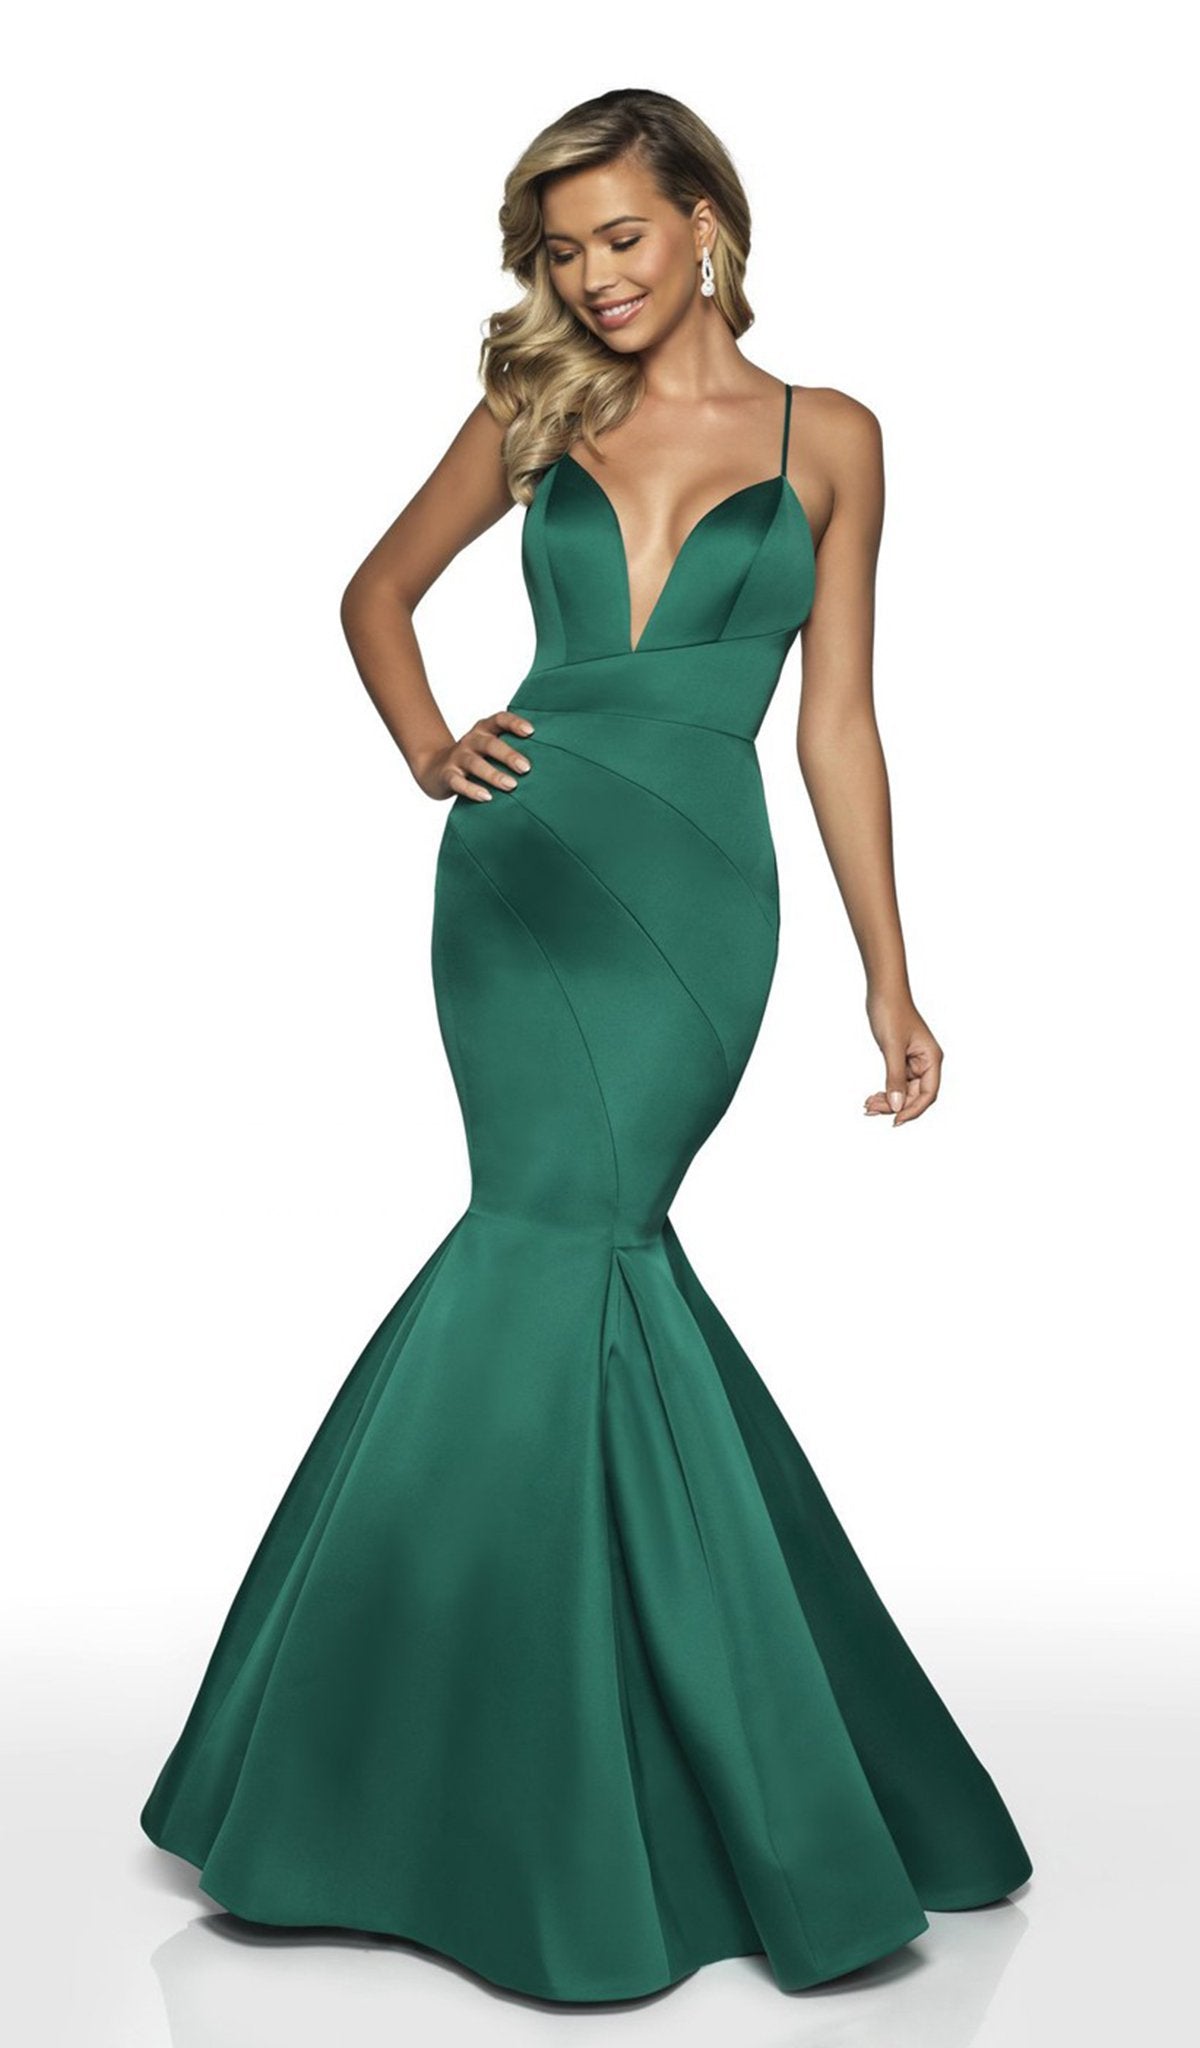 Blush by Alexia Designs - C2018 V Neck Backless Satin Mermaid Gown In Green